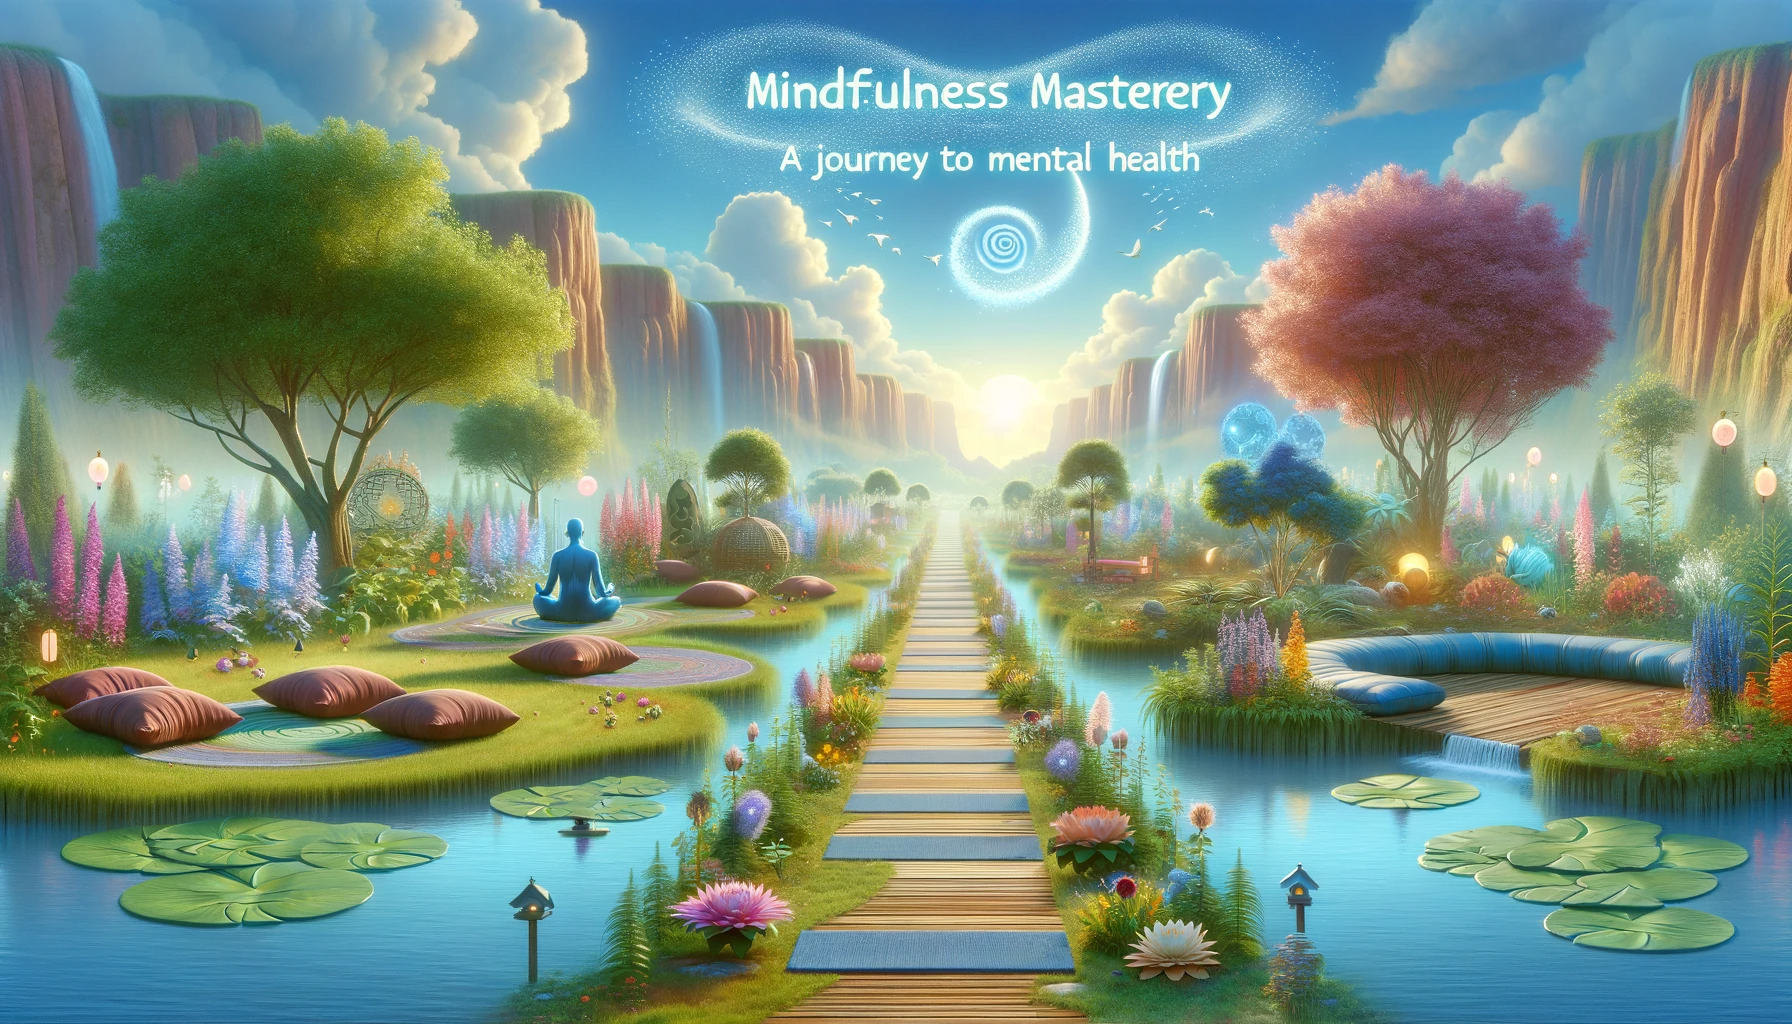 Mindfulness Mastery: A Journey to Mental Health